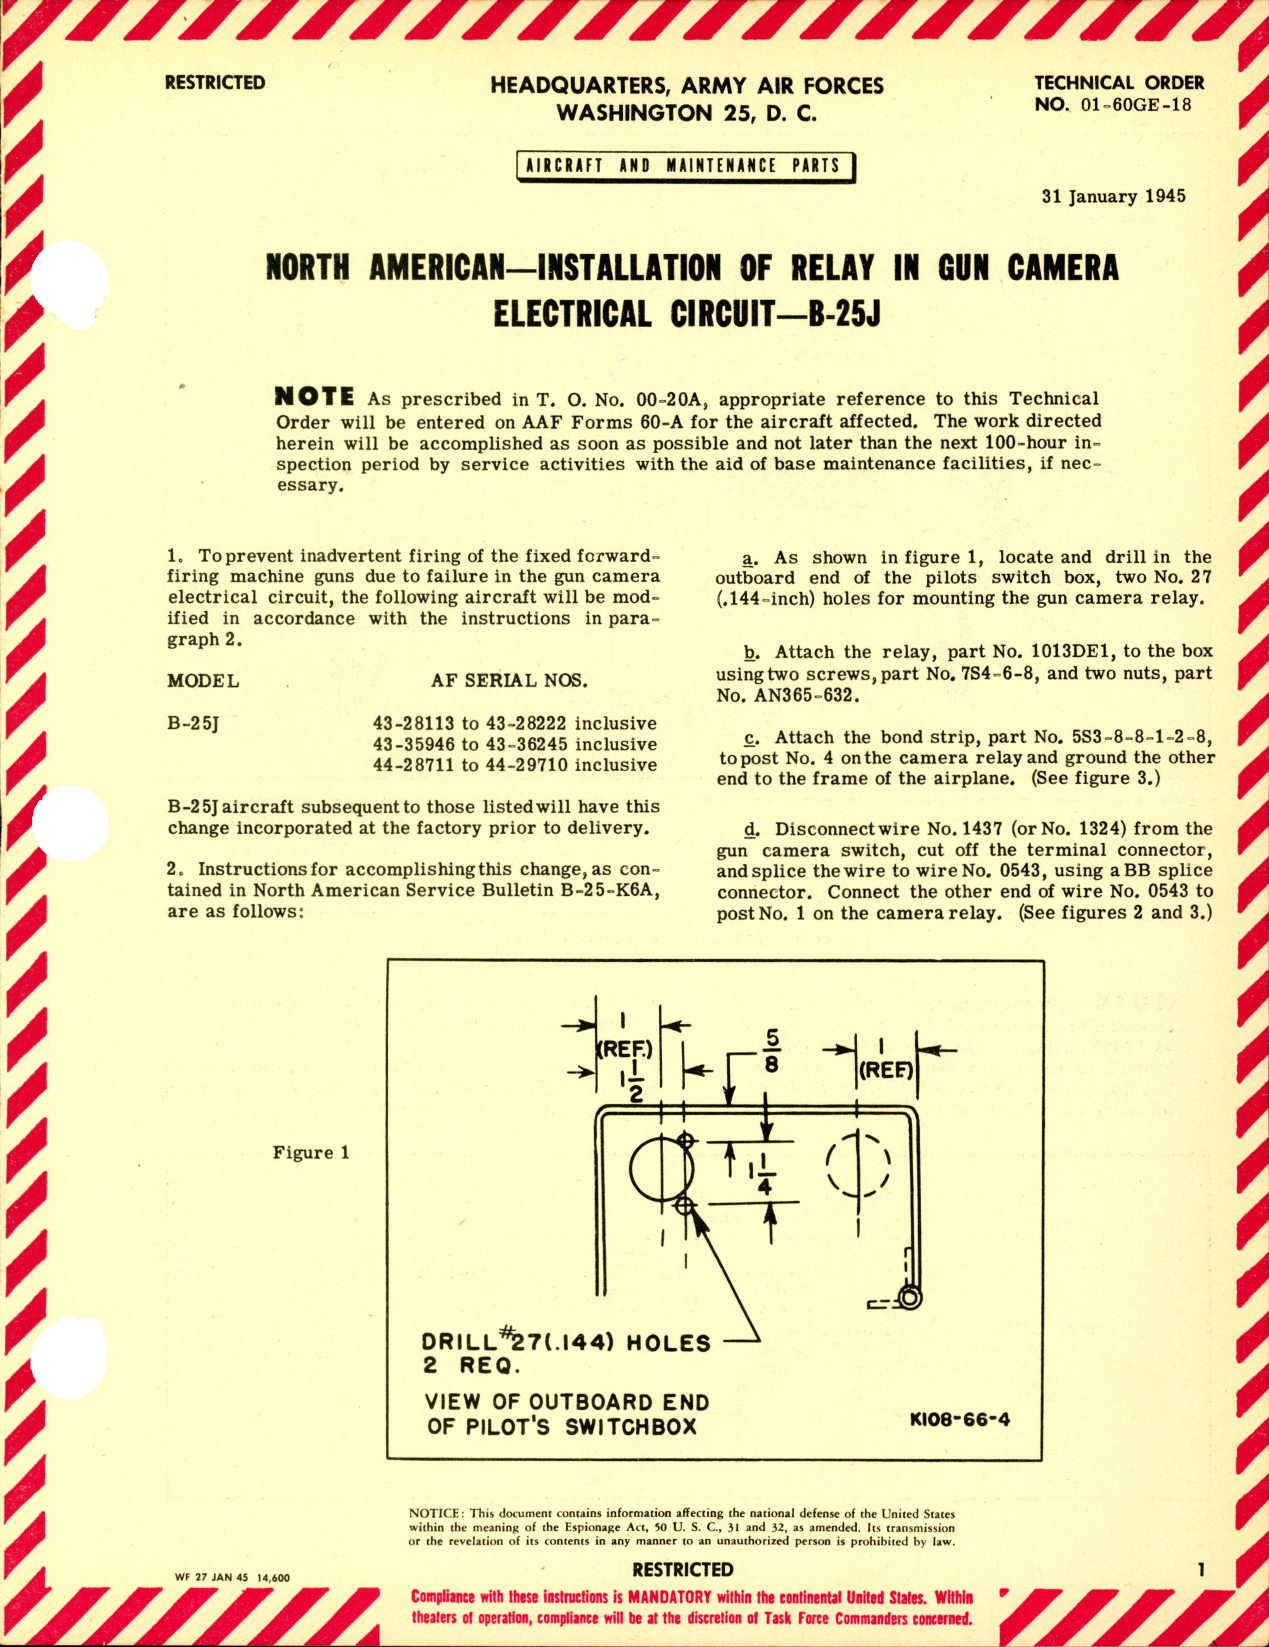 Sample page 1 from AirCorps Library document: Installation of Relay in Gun Camera Electrical Circuit for B-25J